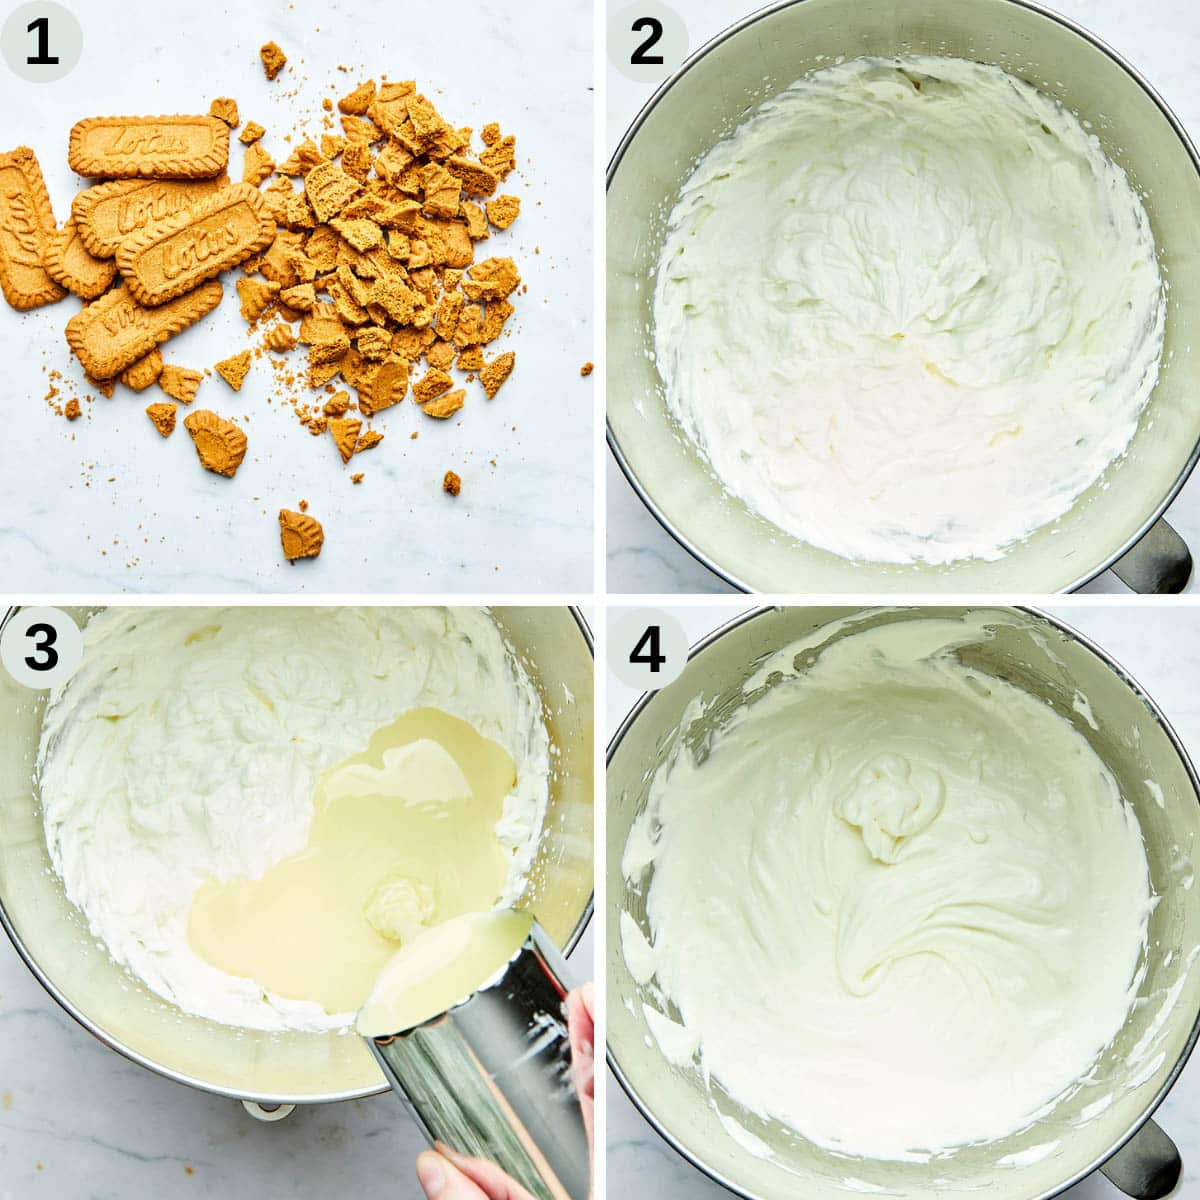 Steps 1 to 4 to make this recipe.